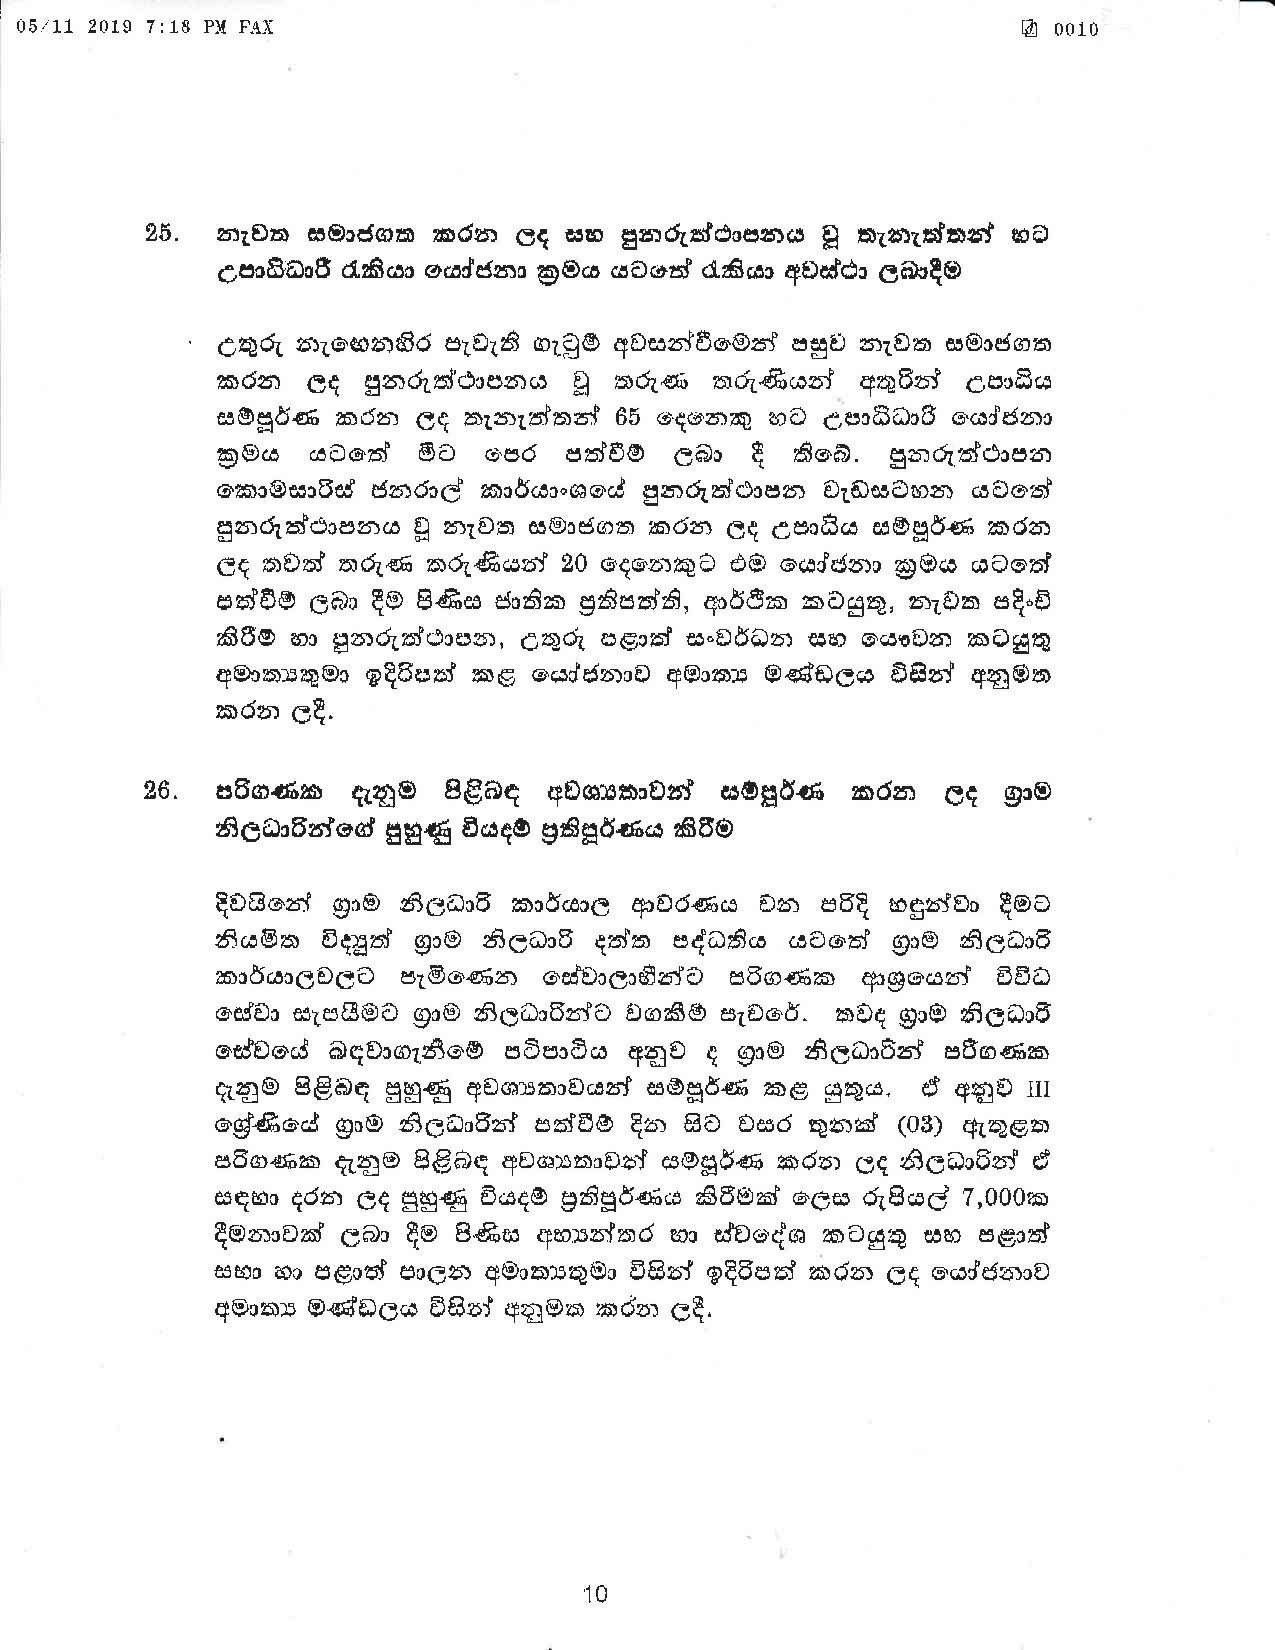 Cabinet Decision on 05.11.2019 page 010